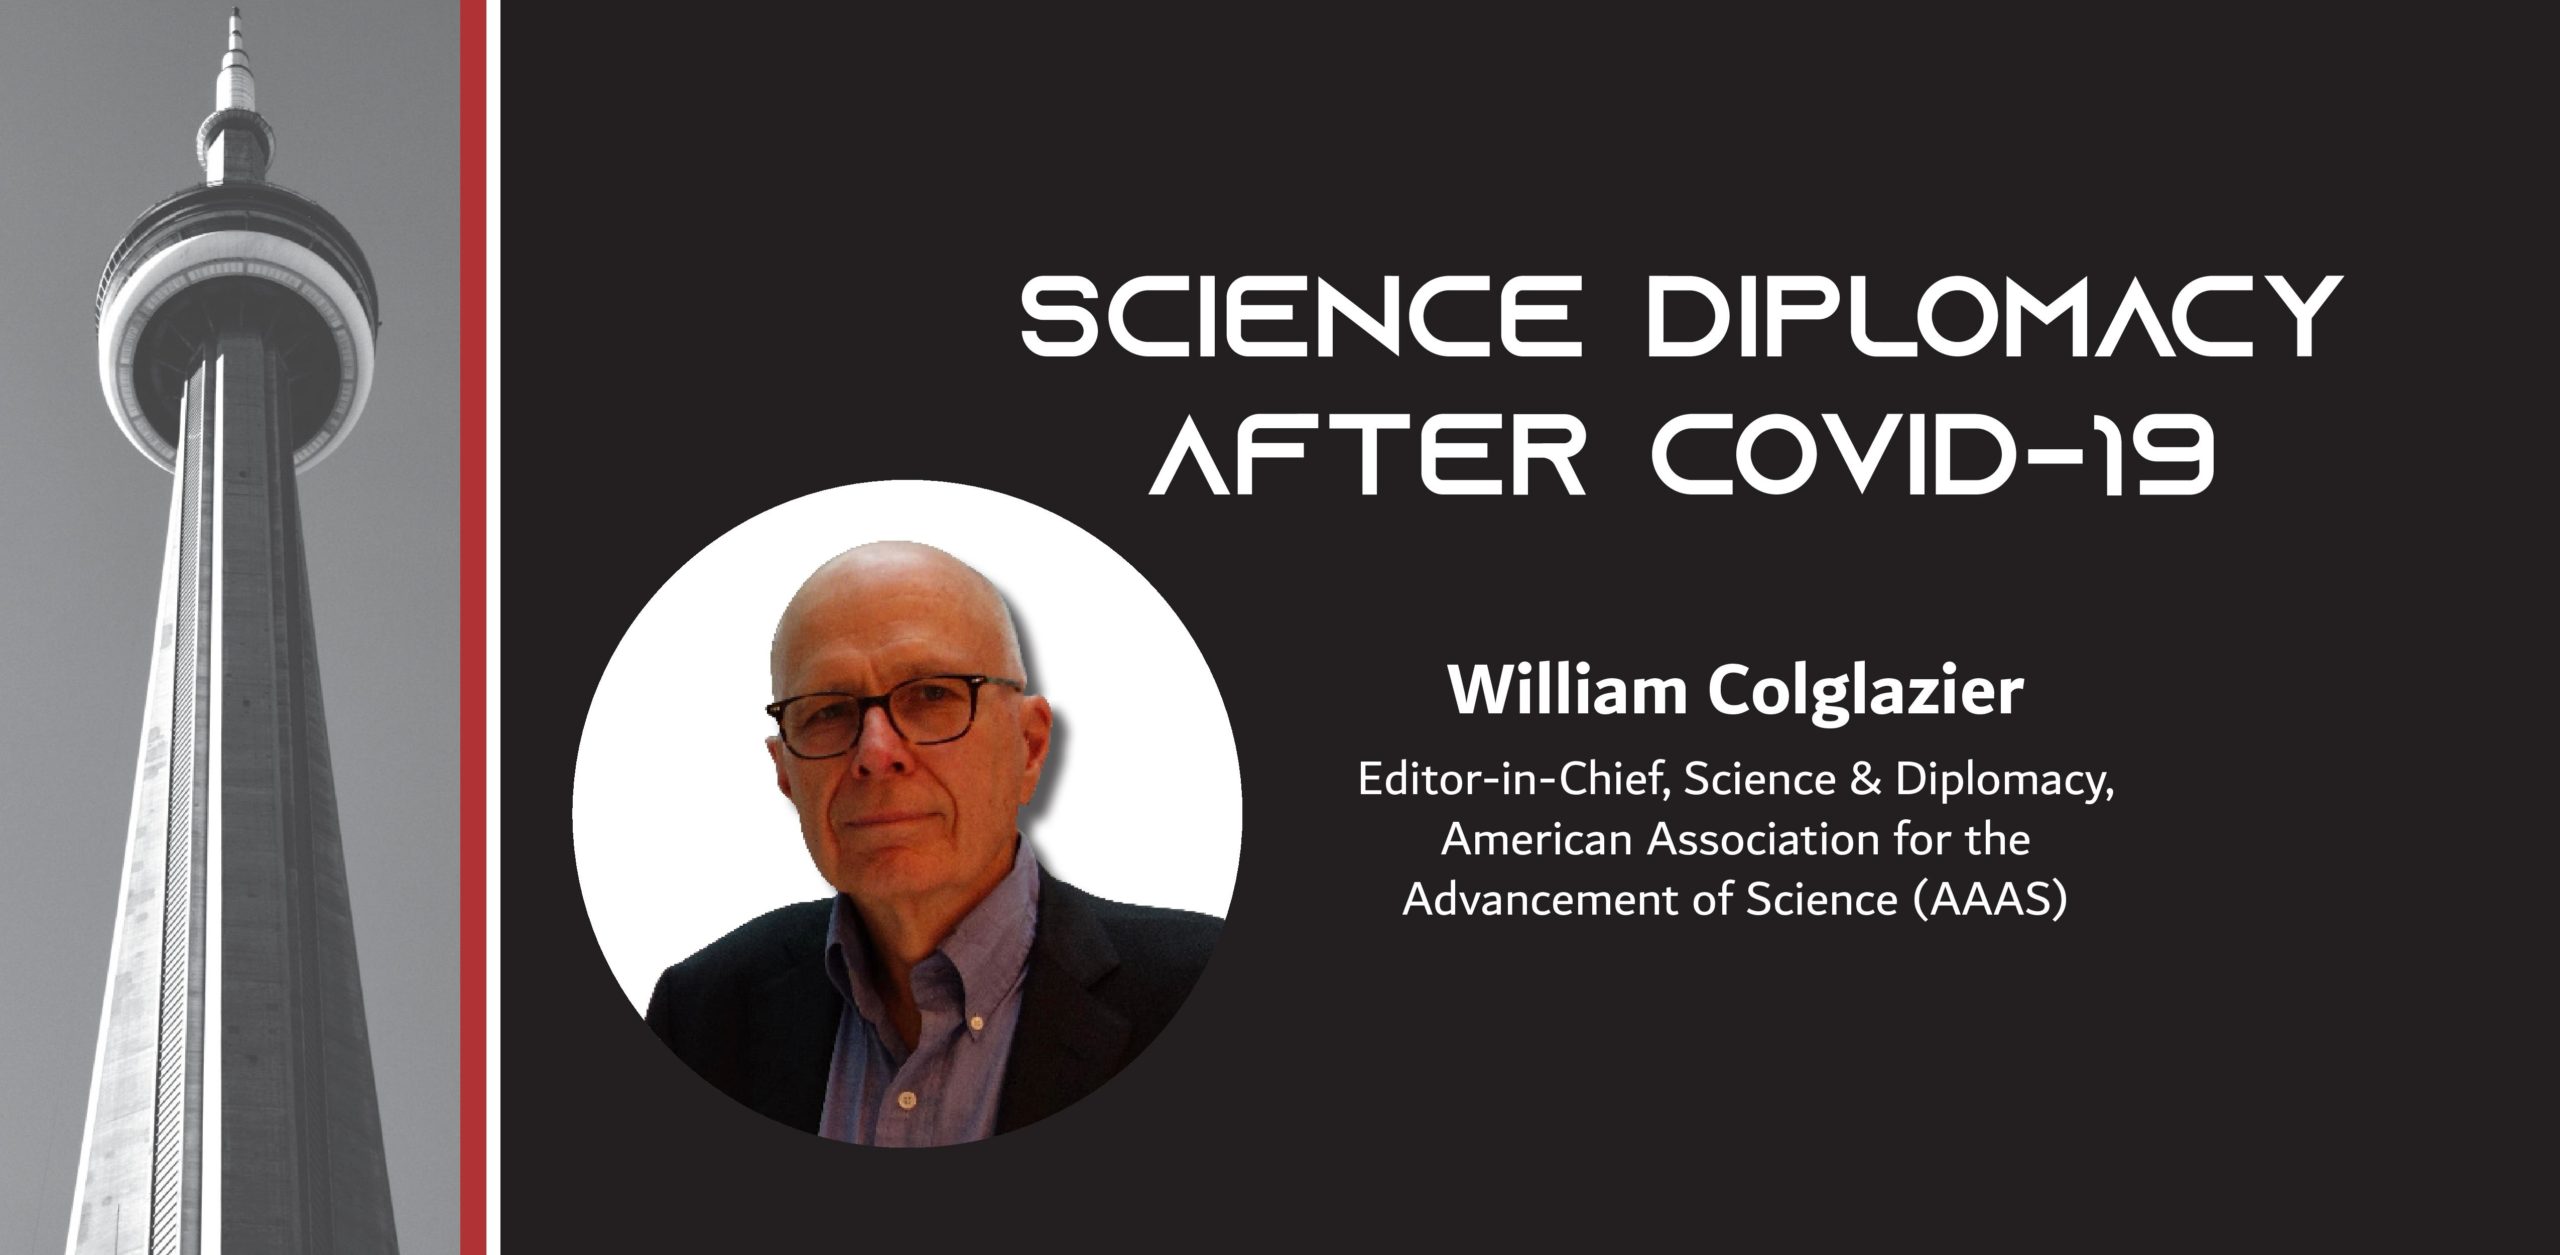 Picture of a man on a black background wiht the text: Science Diplomacy After COVID-19 E. William Colglazier Editor-in-Chief, Science & Diplomacy, American Association for the Advancement of Science (AAAS)